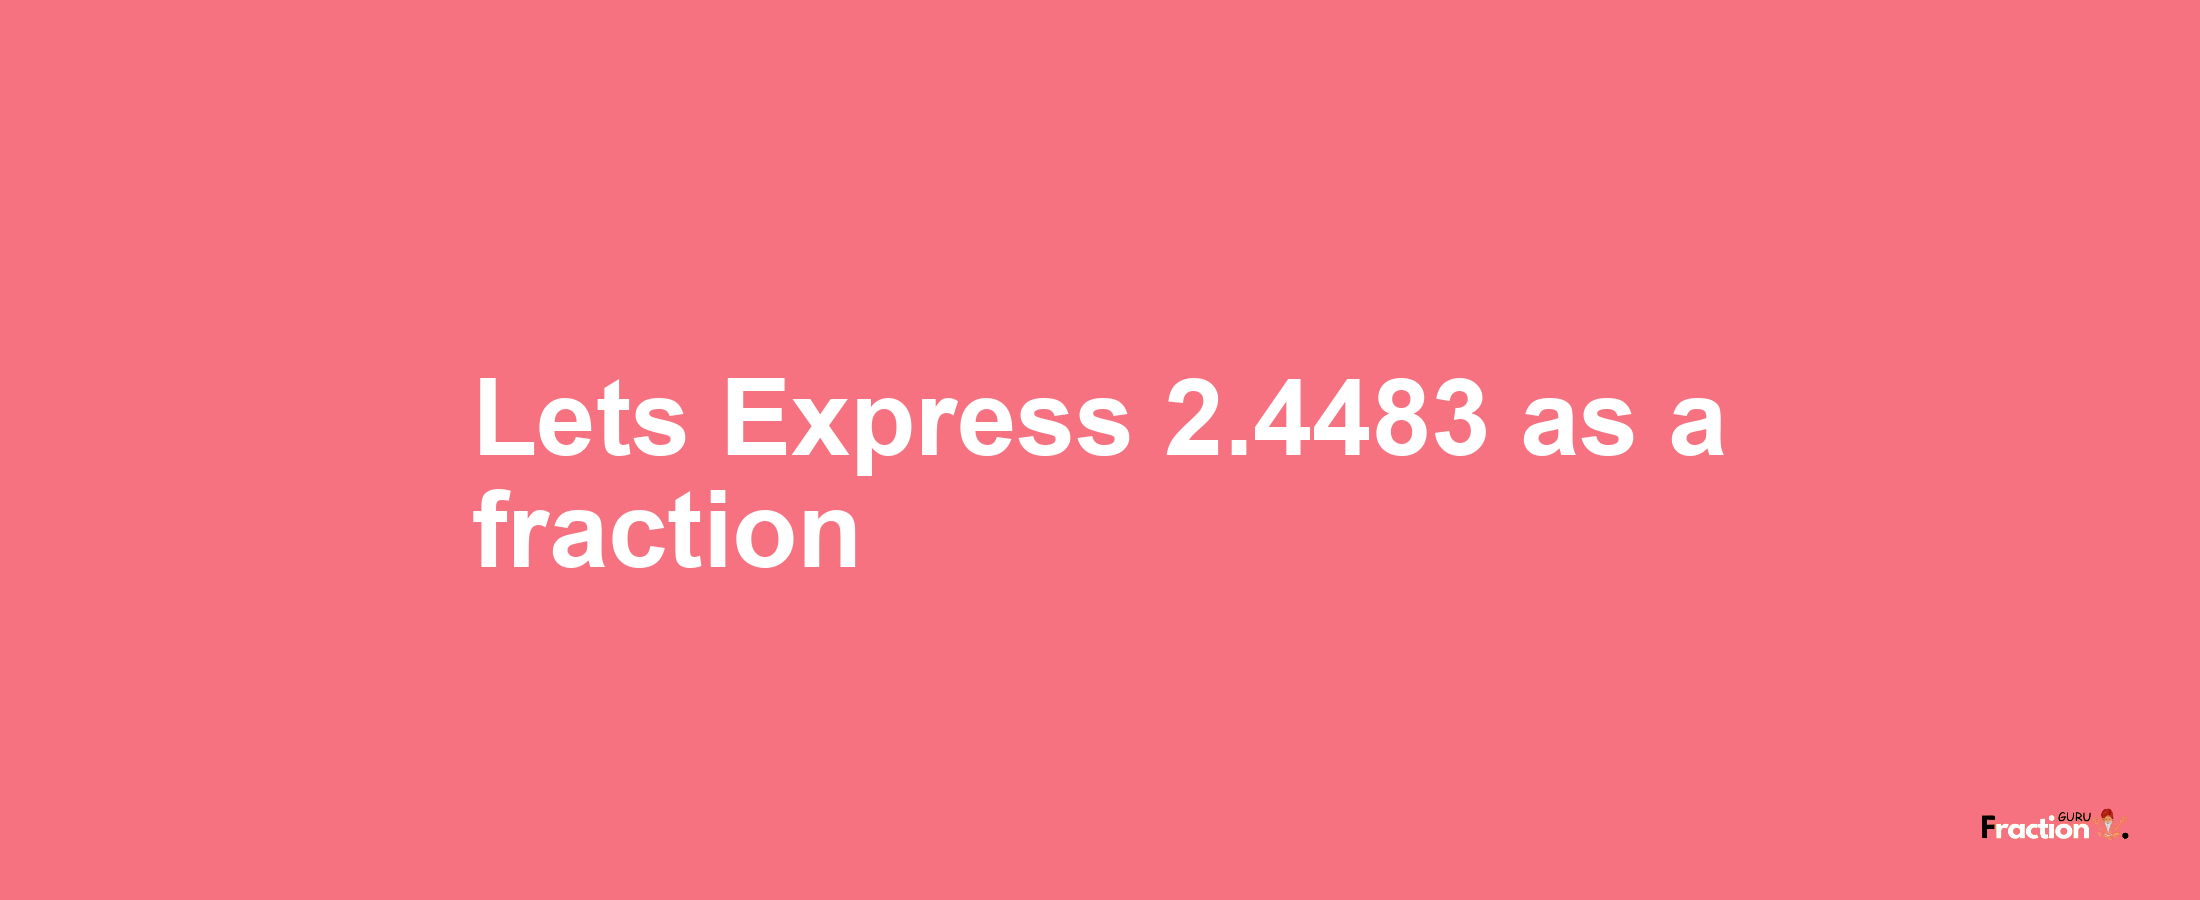 Lets Express 2.4483 as afraction